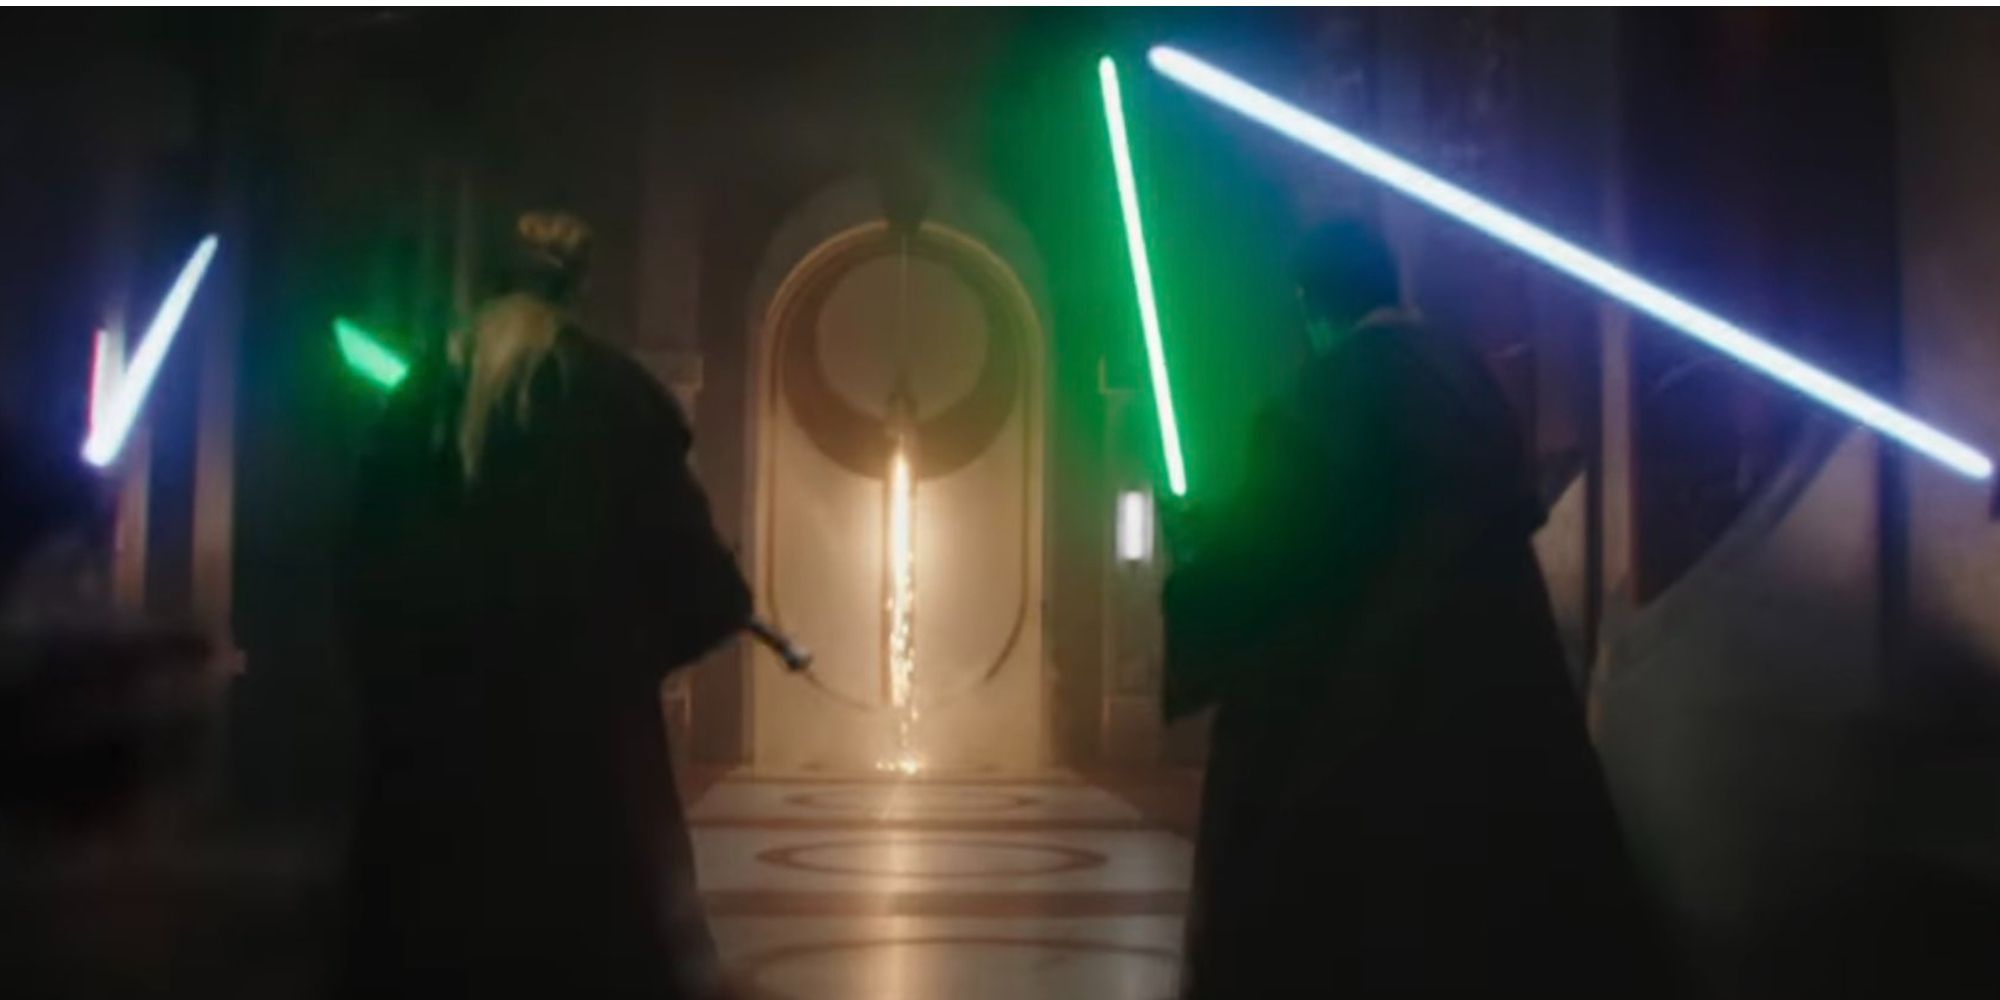 jedis in the jedi temple during order 66 in the mandalorian